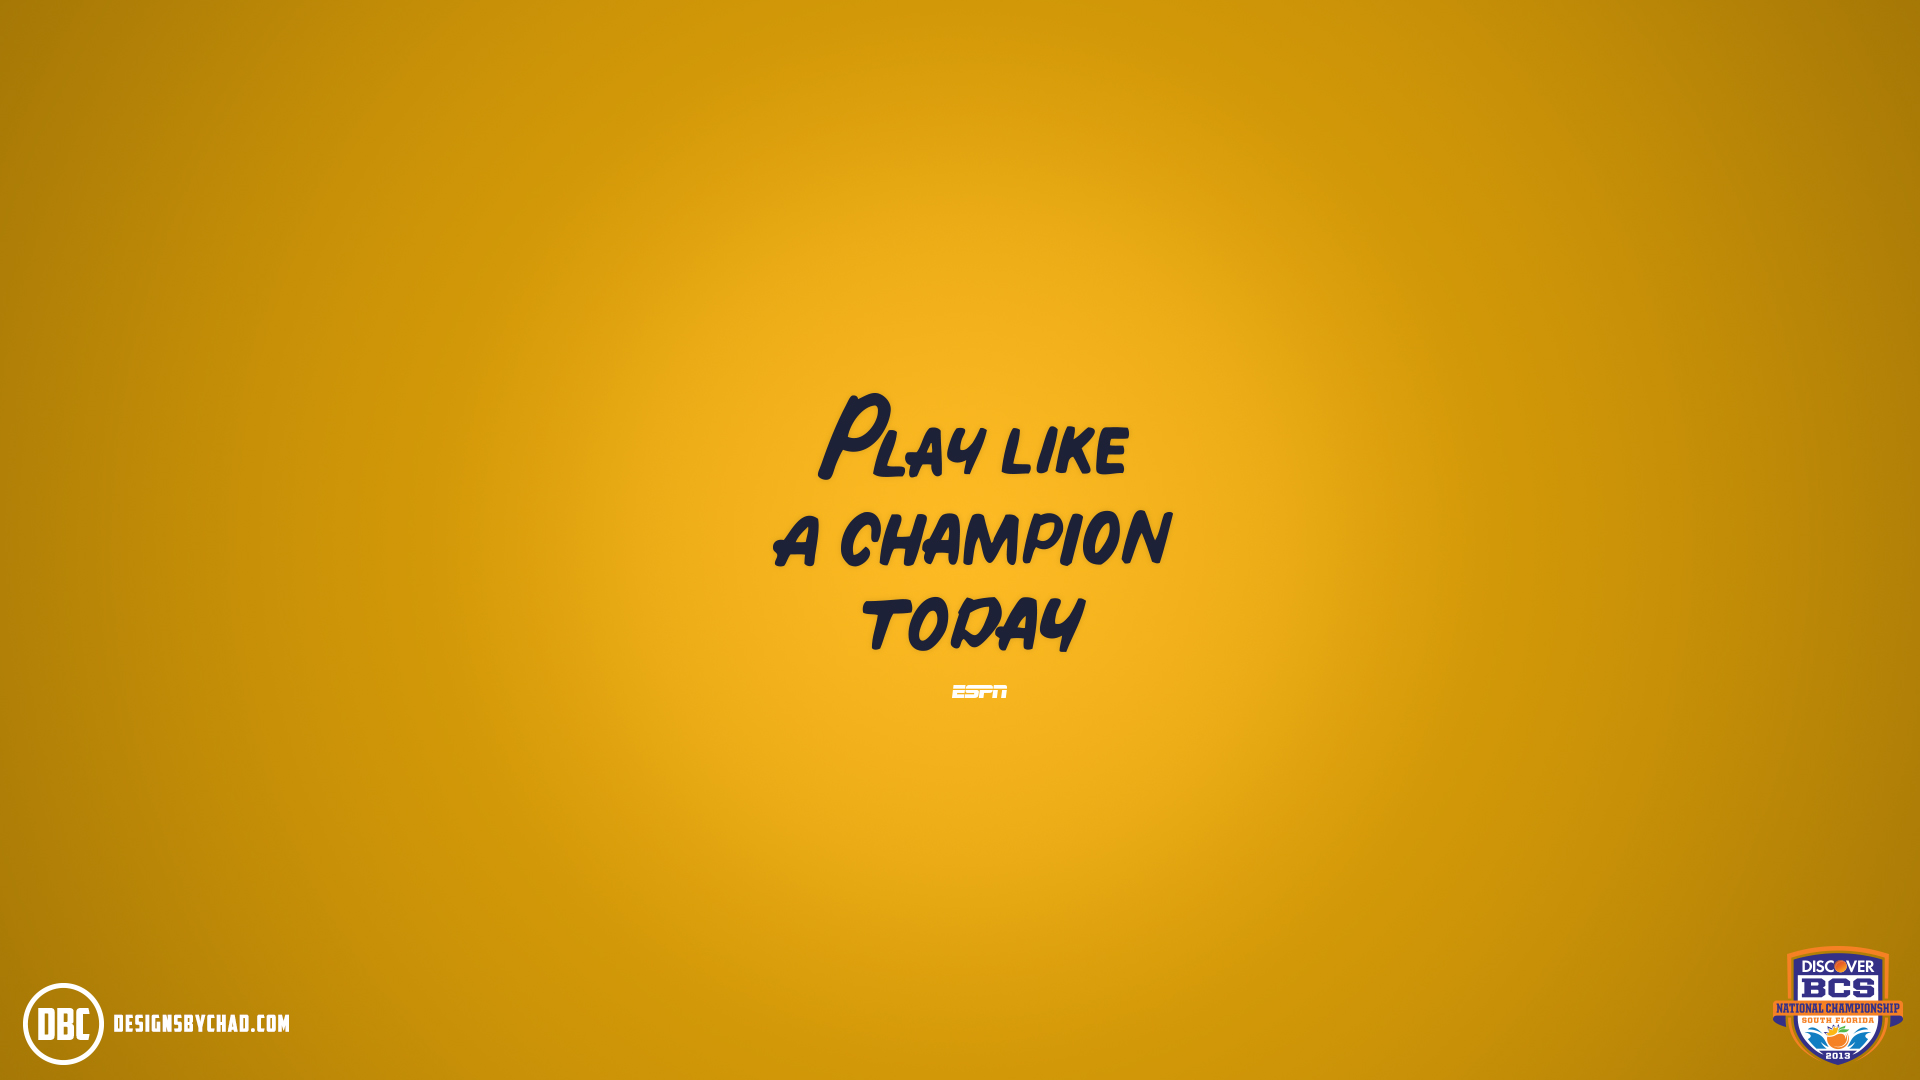 Play Like A Champ Today Notre Dame Wallpaper by Chadski51 on DeviantArt